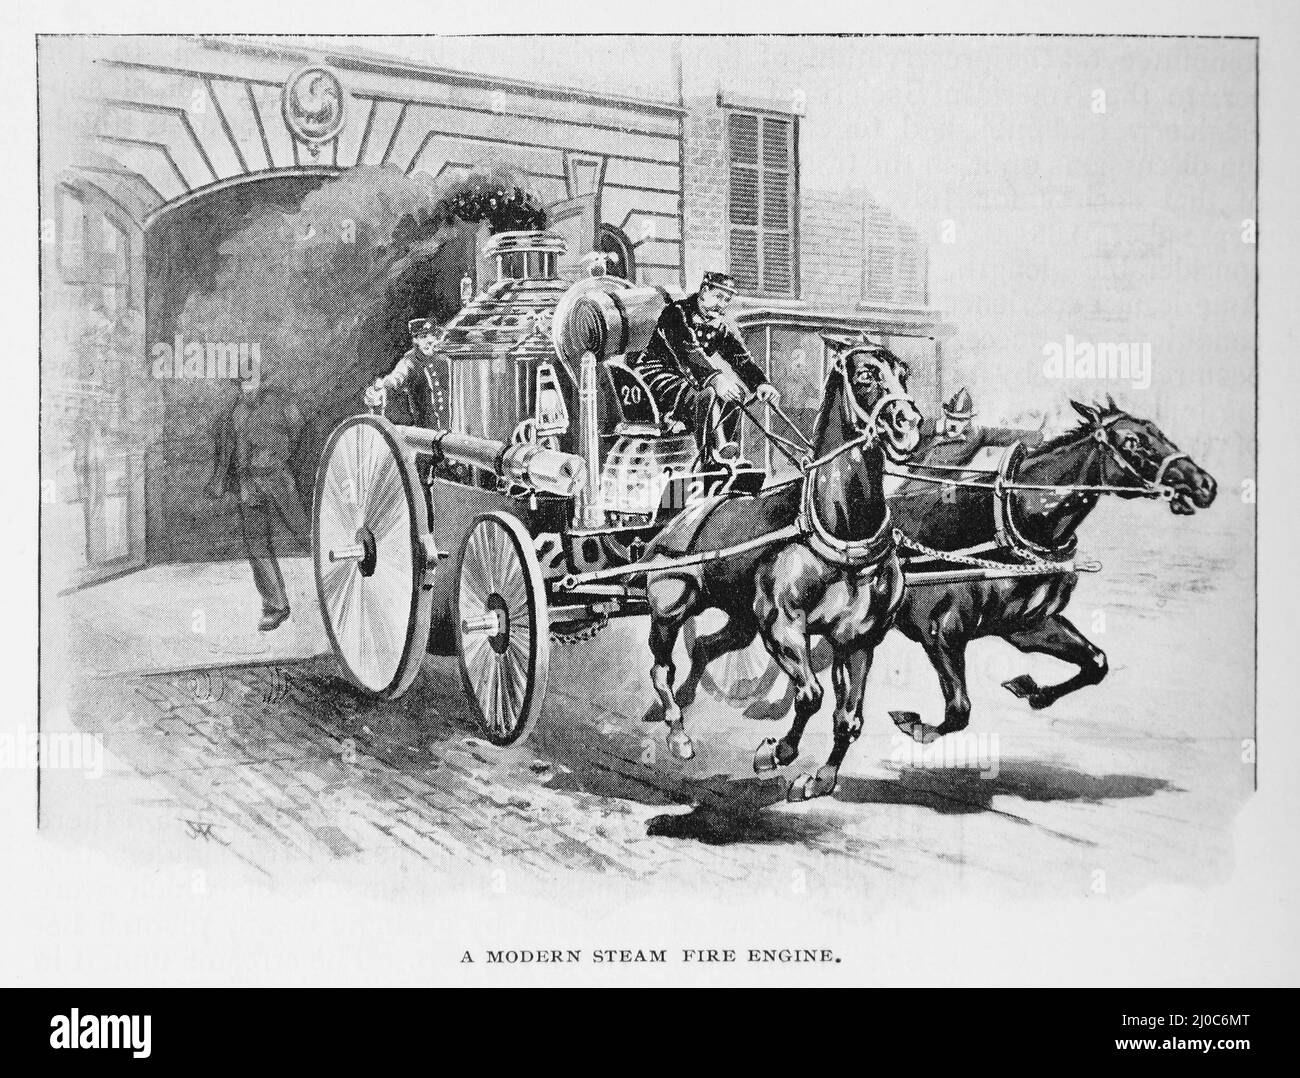 American Horse-drawn Steam Fire Engine of the 1890s; Black and White Illustration; Stock Photo